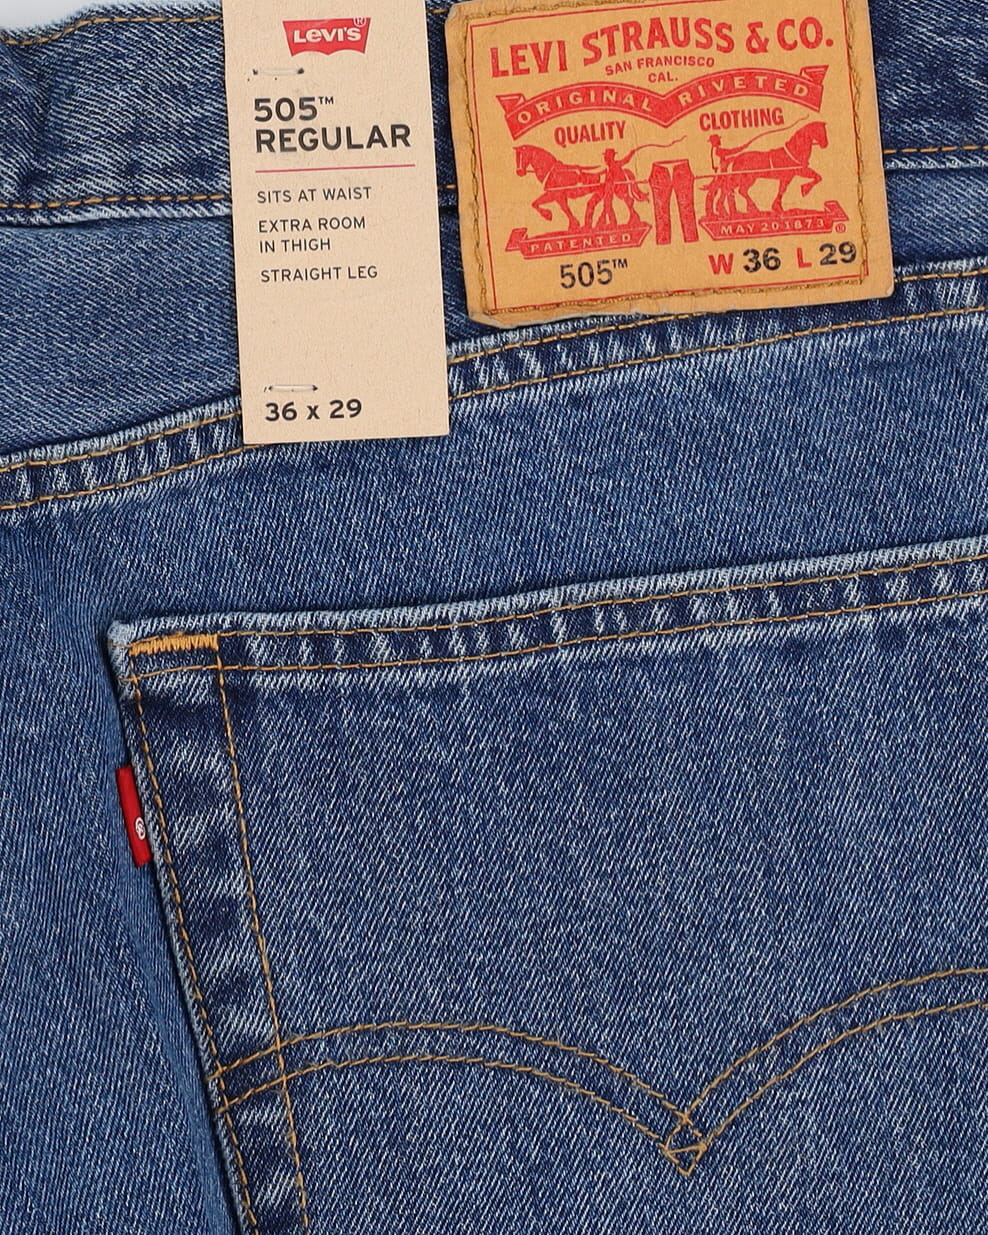 Levi's 505 New With Tags Blue Jeans - W36 L29